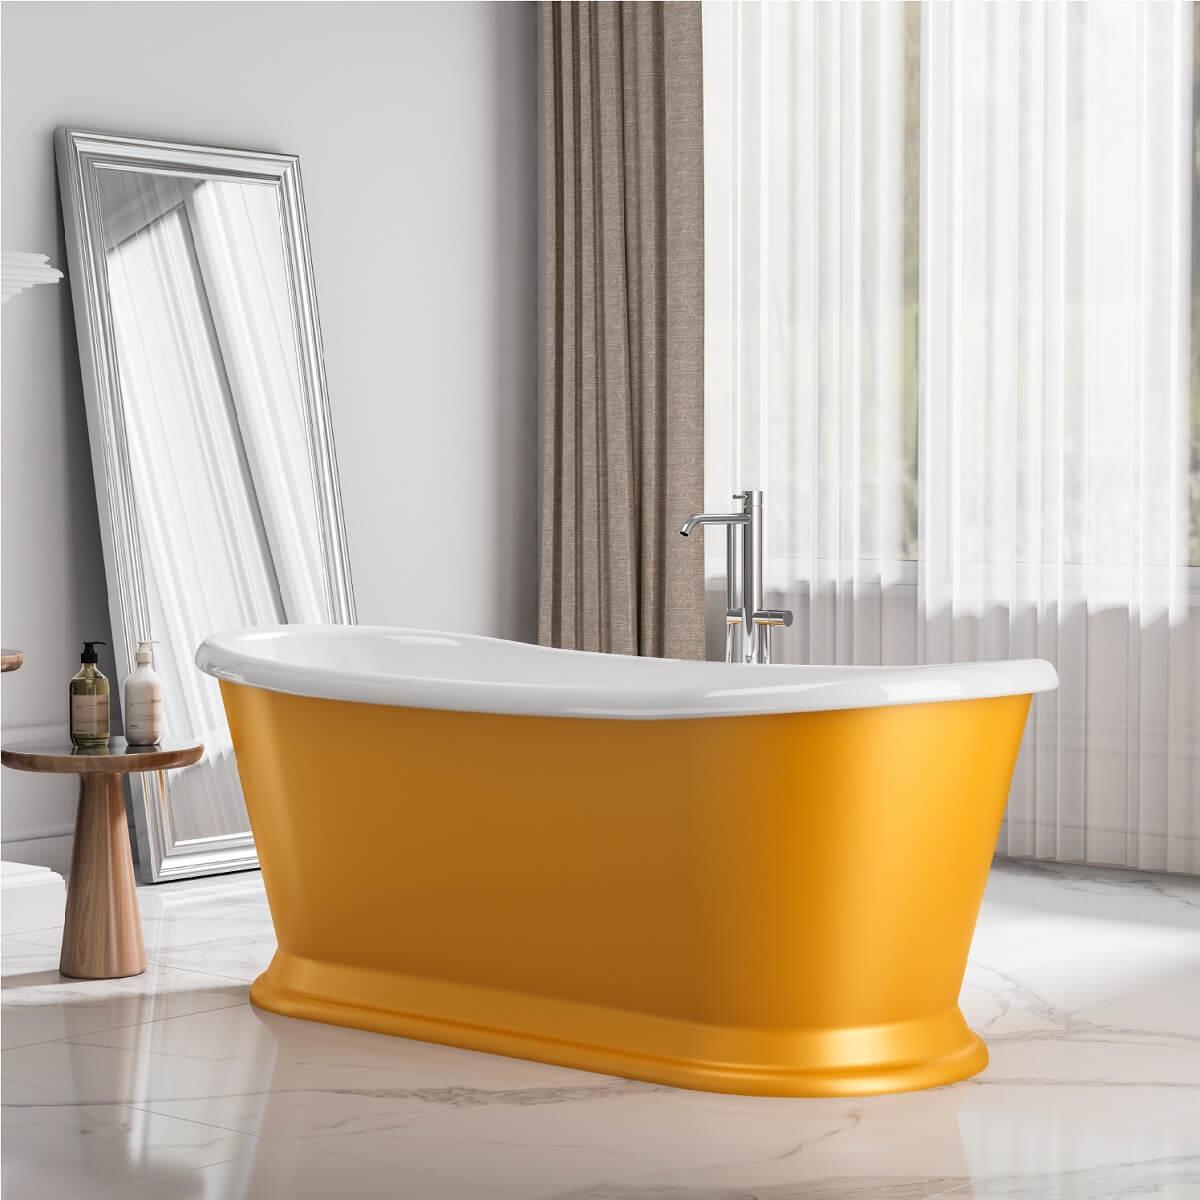 An image of Charlotte Edwards Bespoke Colour Painted Bath Farrow & Ball Rosemary Boat Freest...